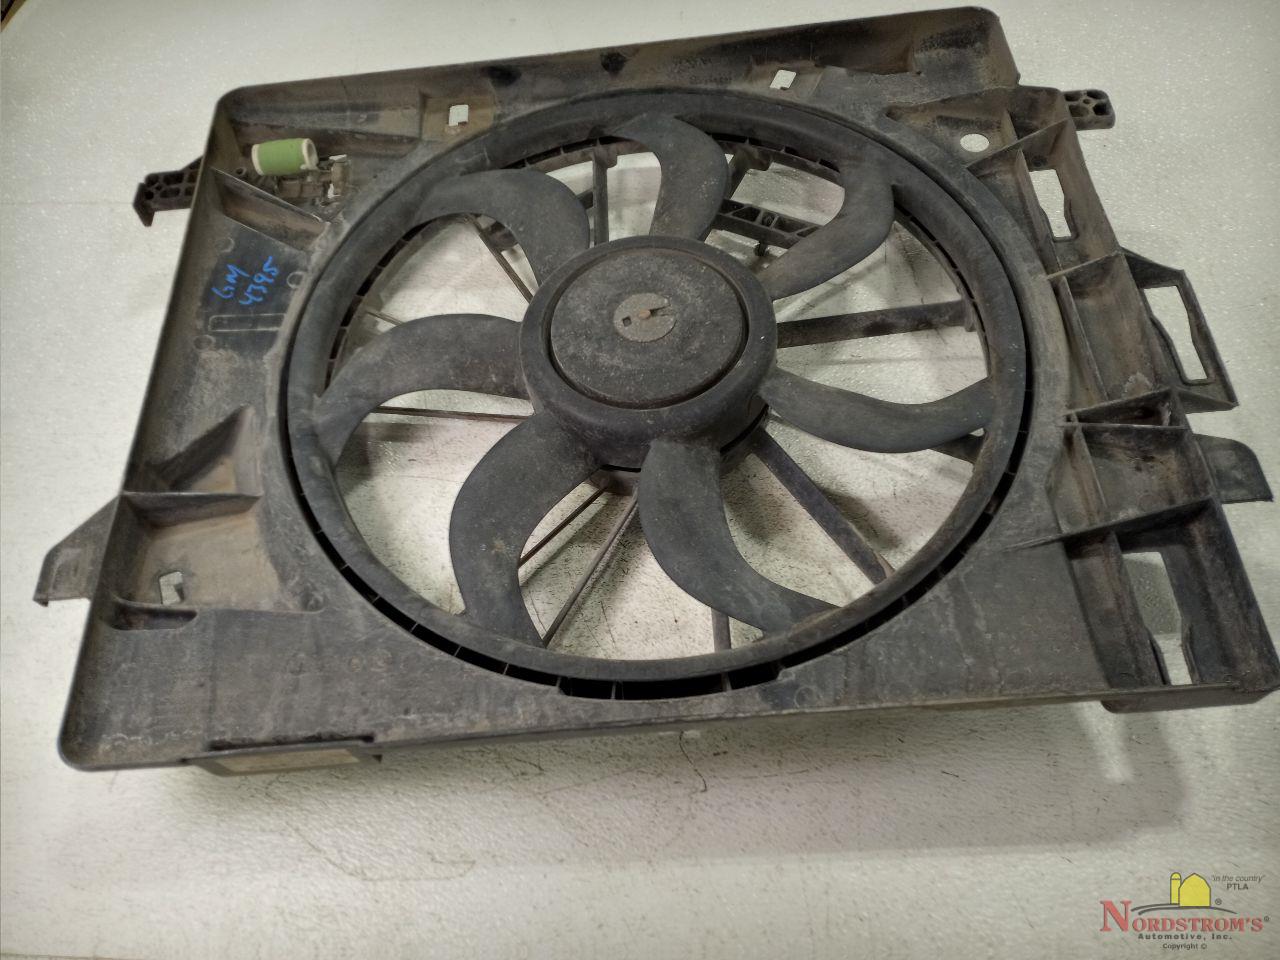 2010 Chrysler Town & Country RADIATOR COOLING FAN ASSEMBLY | eBay 2010 Chrysler Town And Country Radiator Fan Not Working